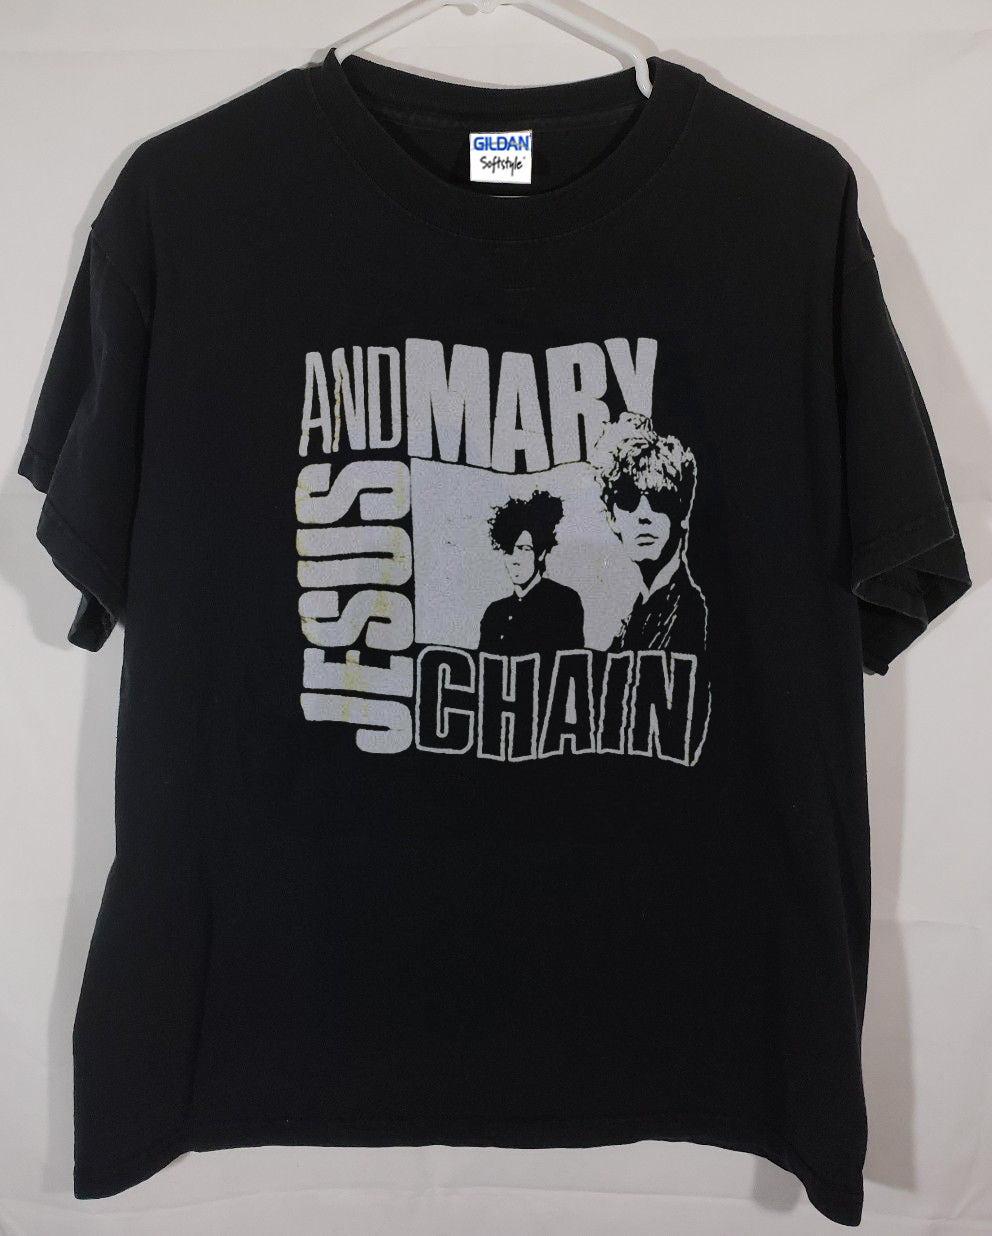 Vintage The Jesus Lizard And mary chain